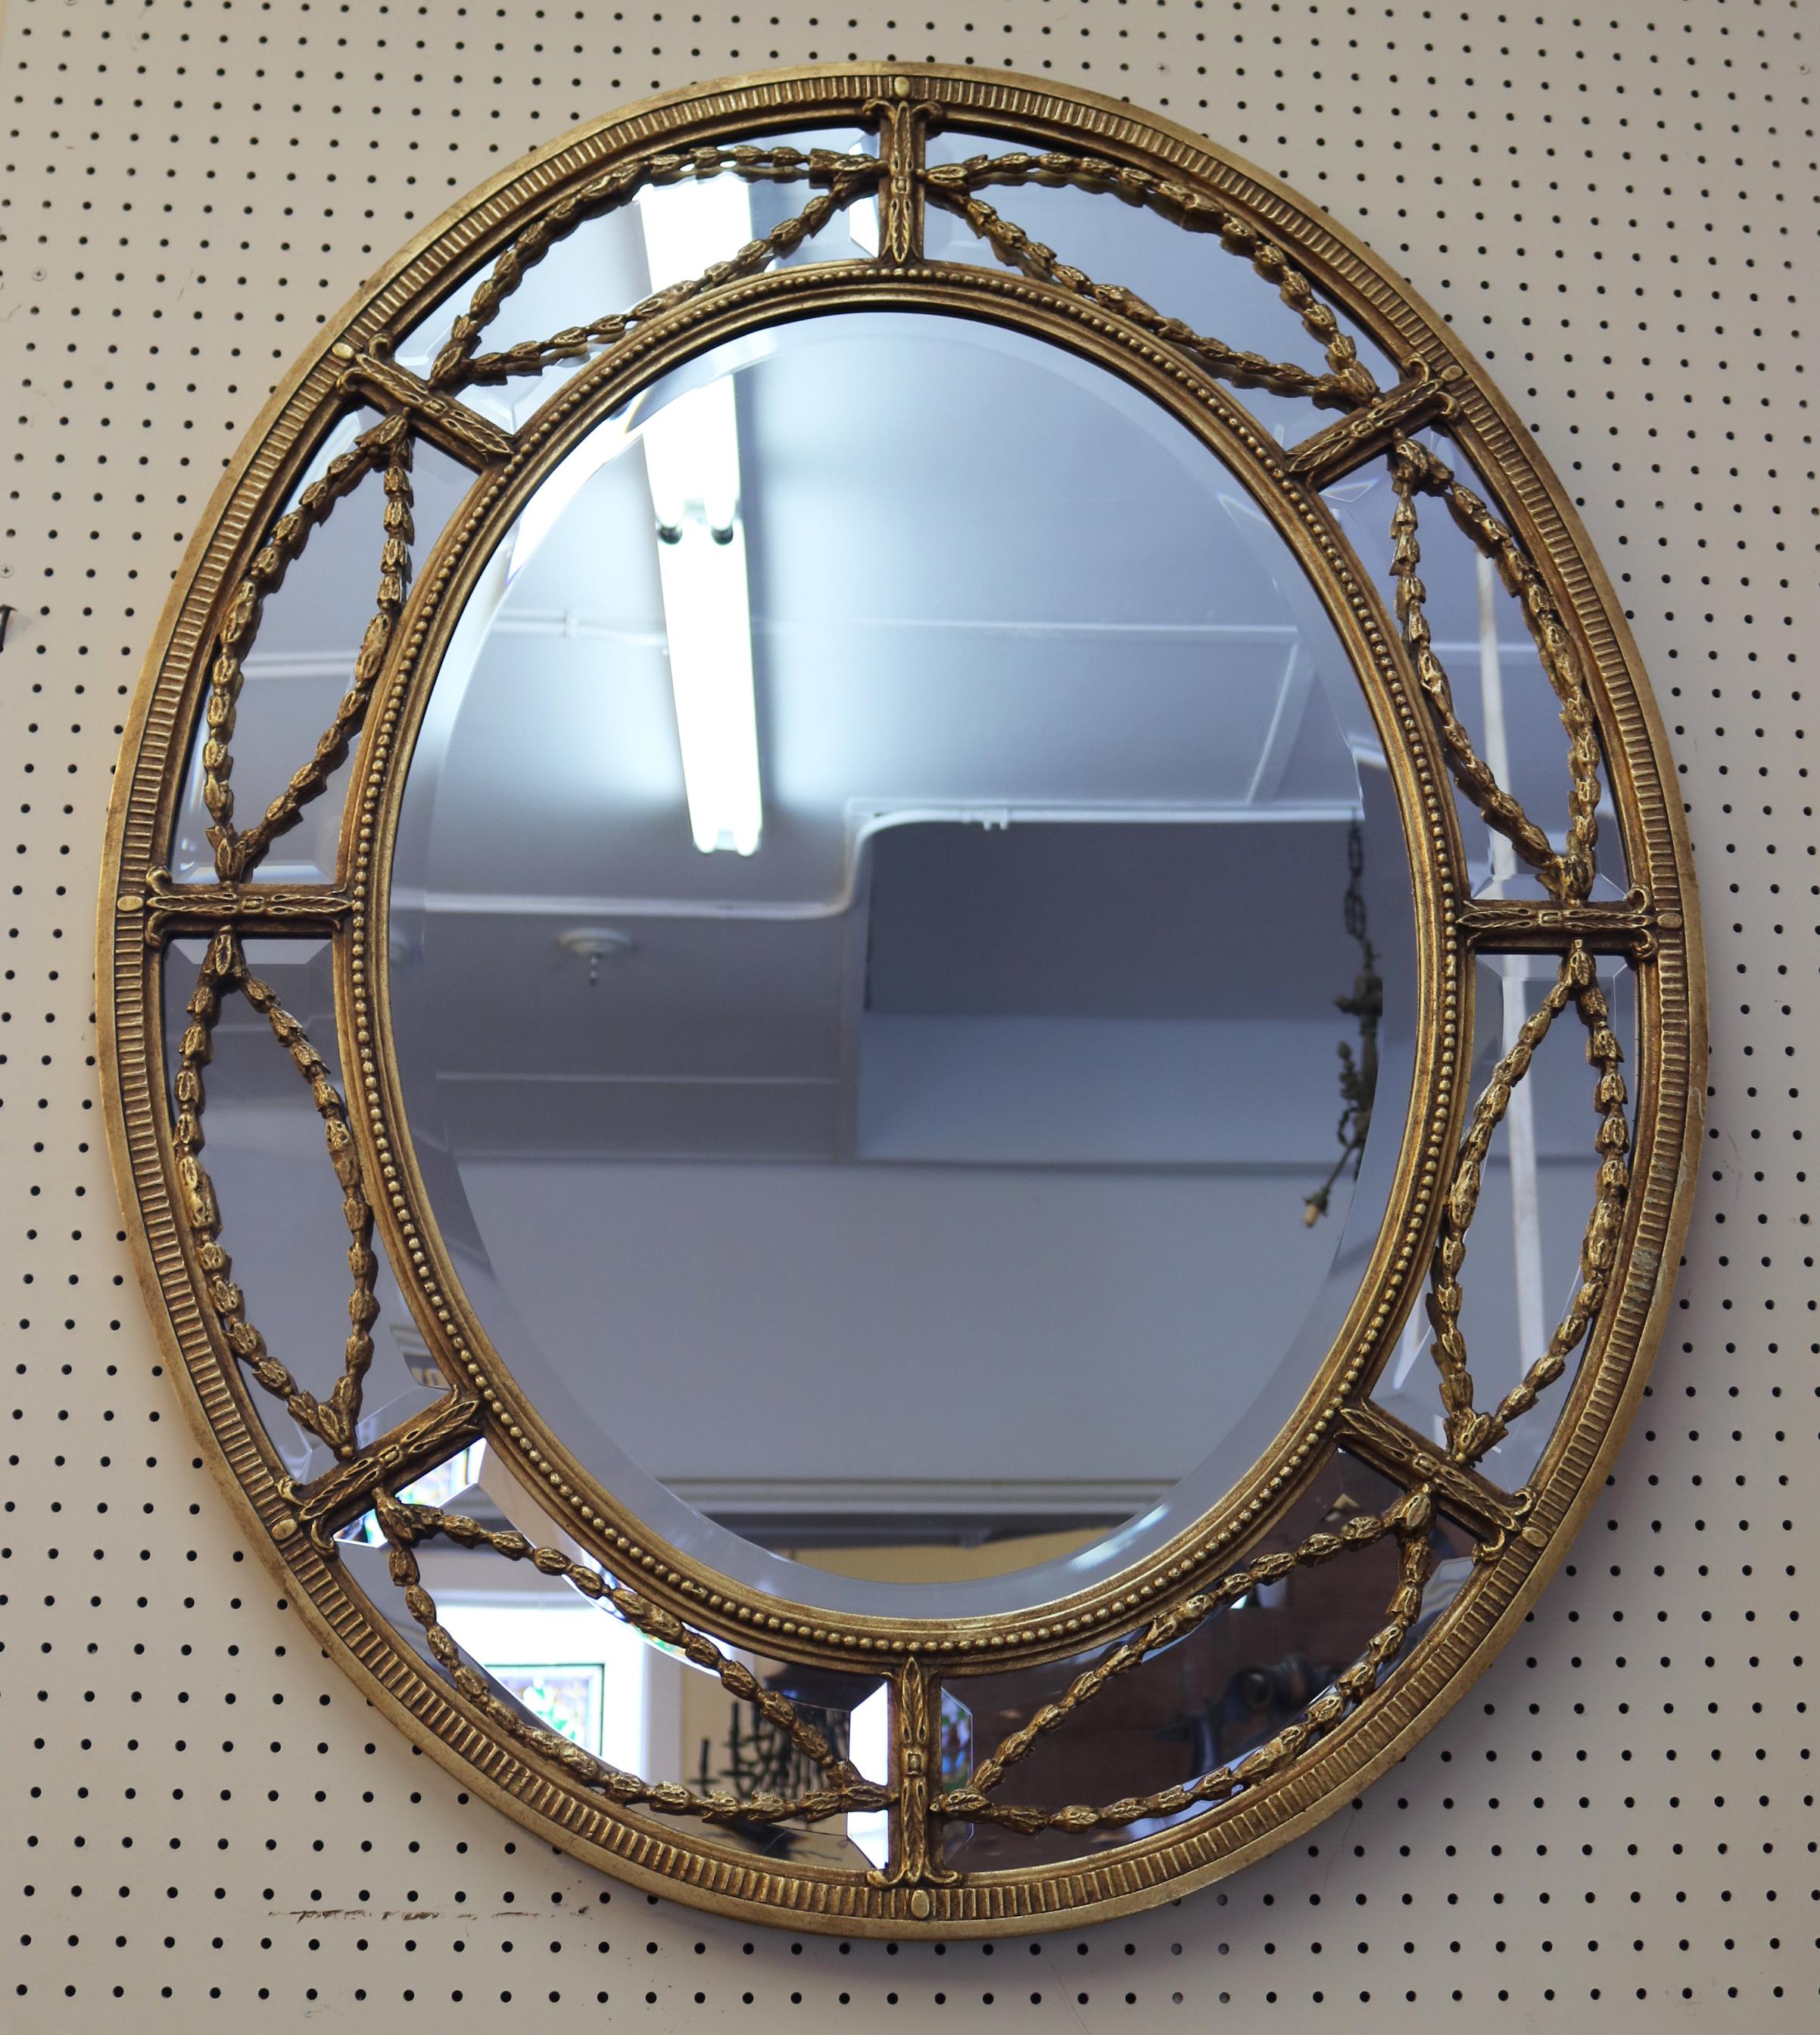 Friedman Brothers Beveled Mirror Model Adamesque Horizontal or Vertical For Sale 8